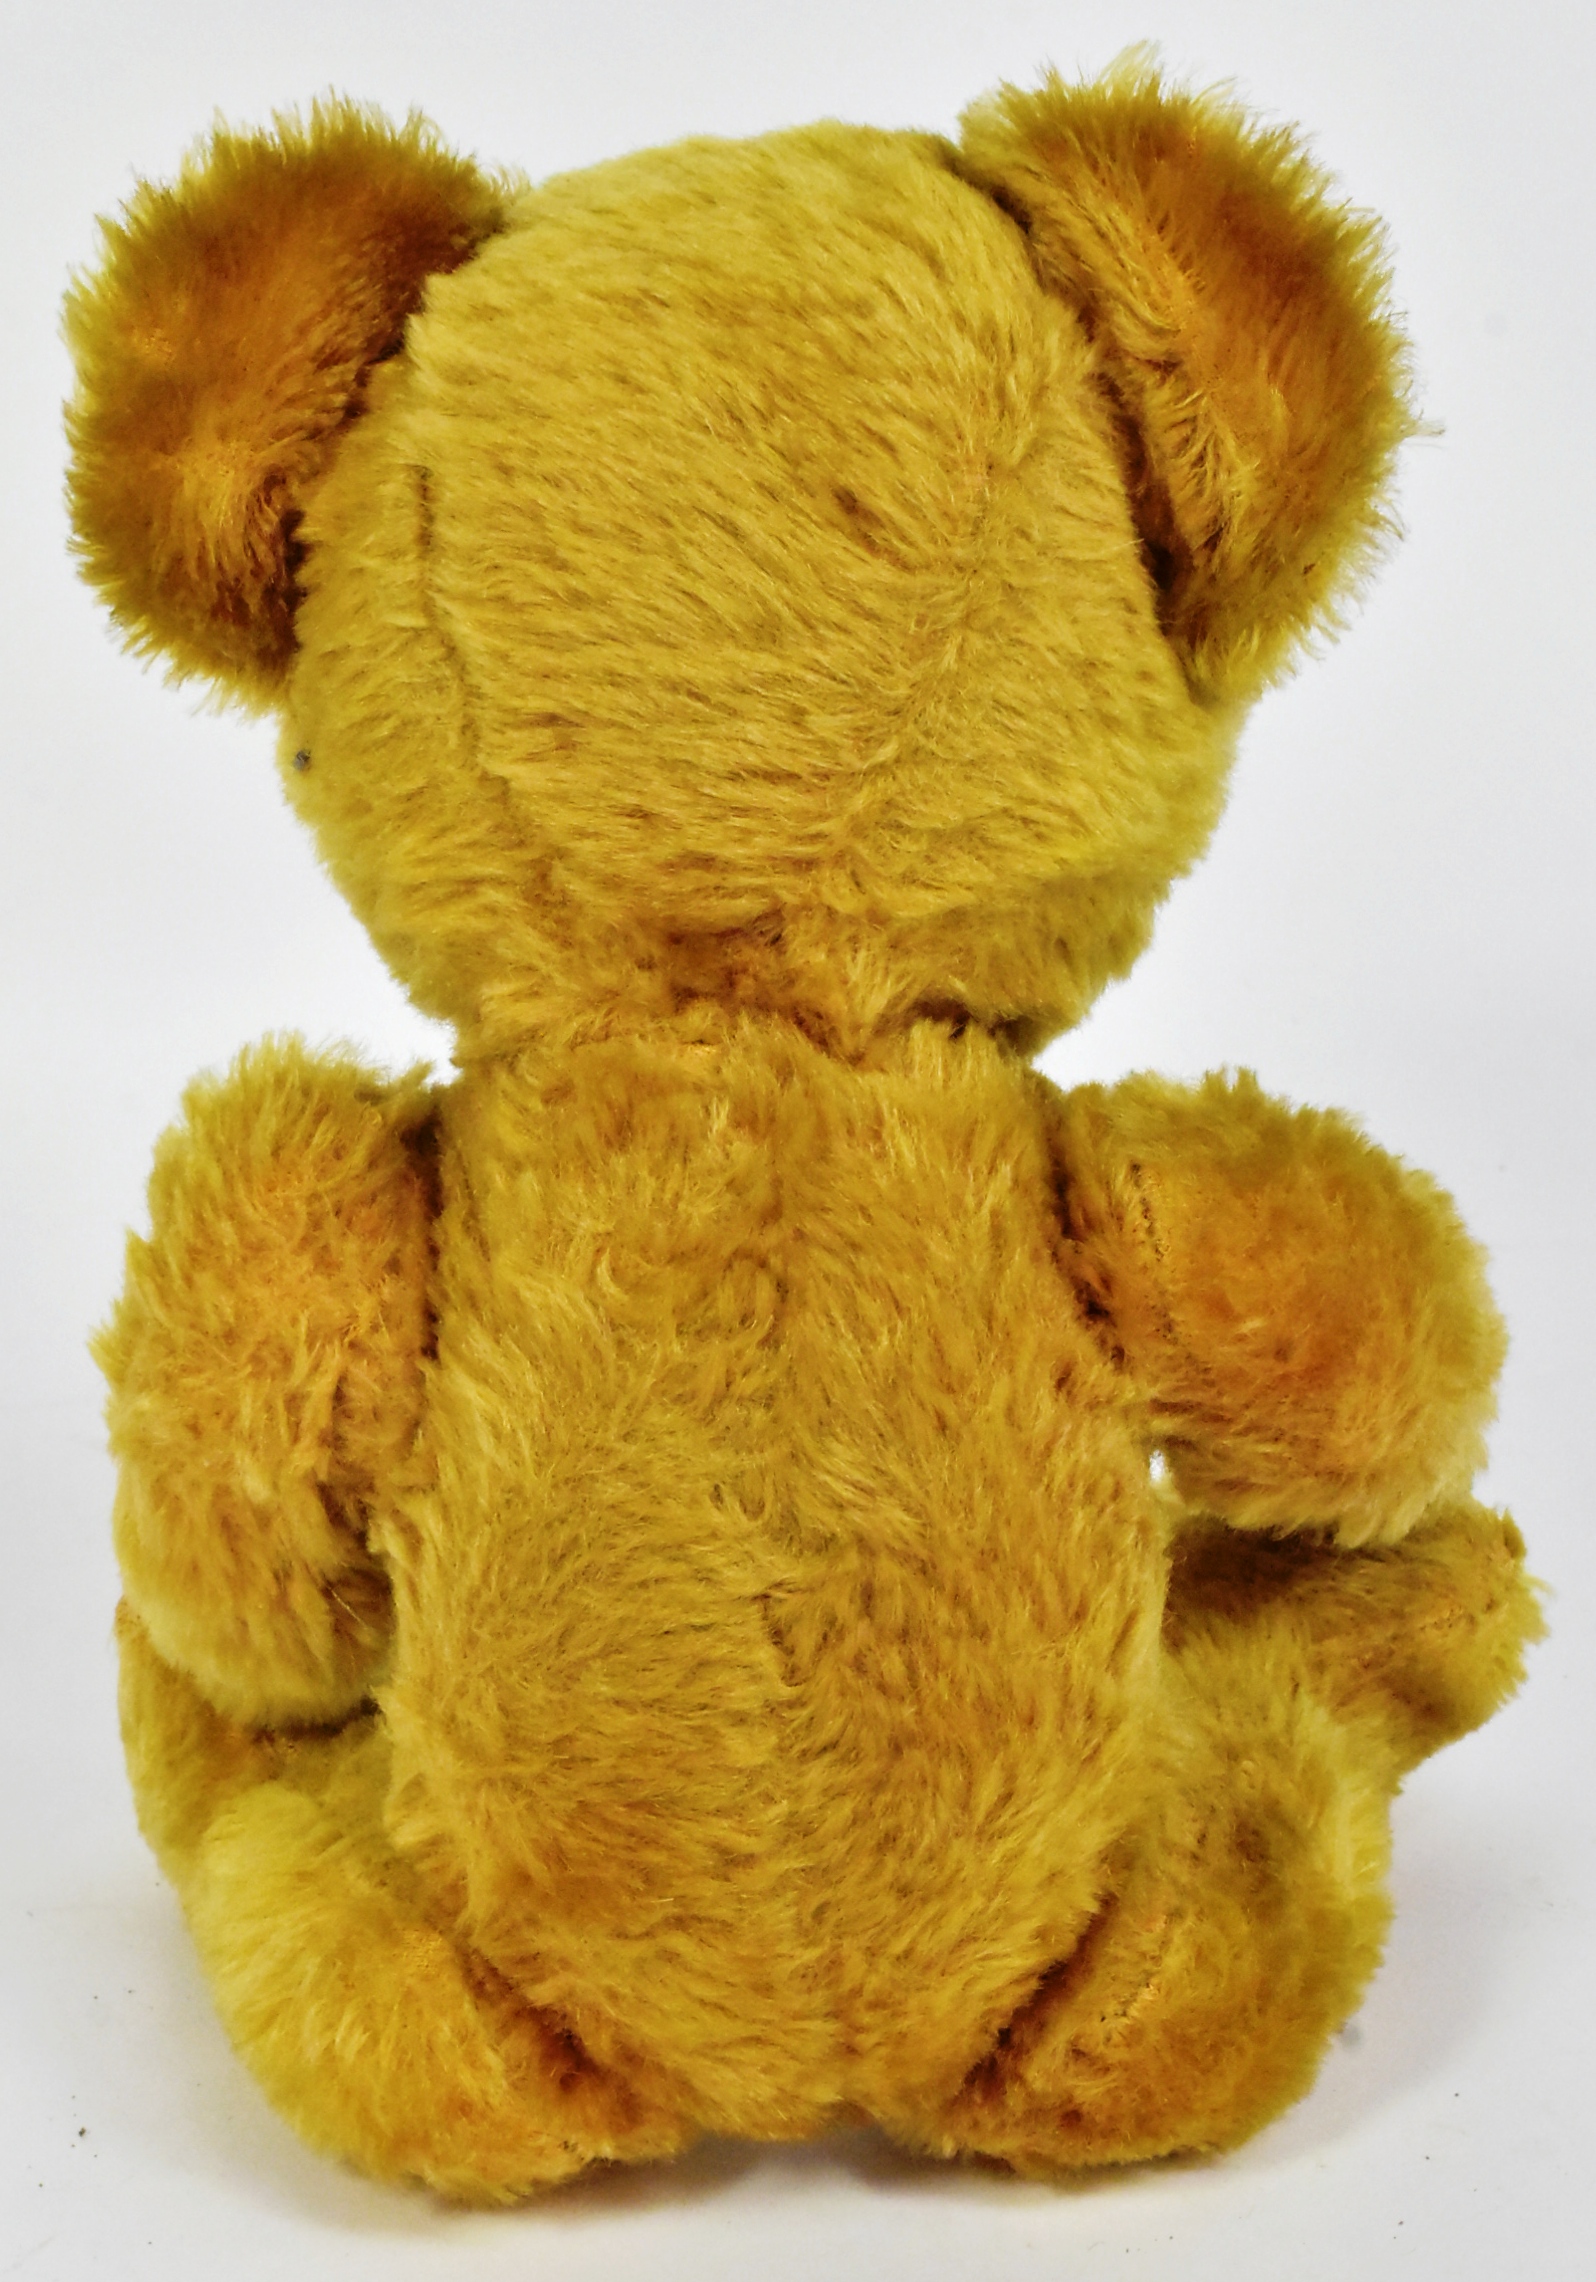 TEDDY BEARS - VINTAGE MERRYTHOUGHT CHEEKY BEAR - Image 4 of 5